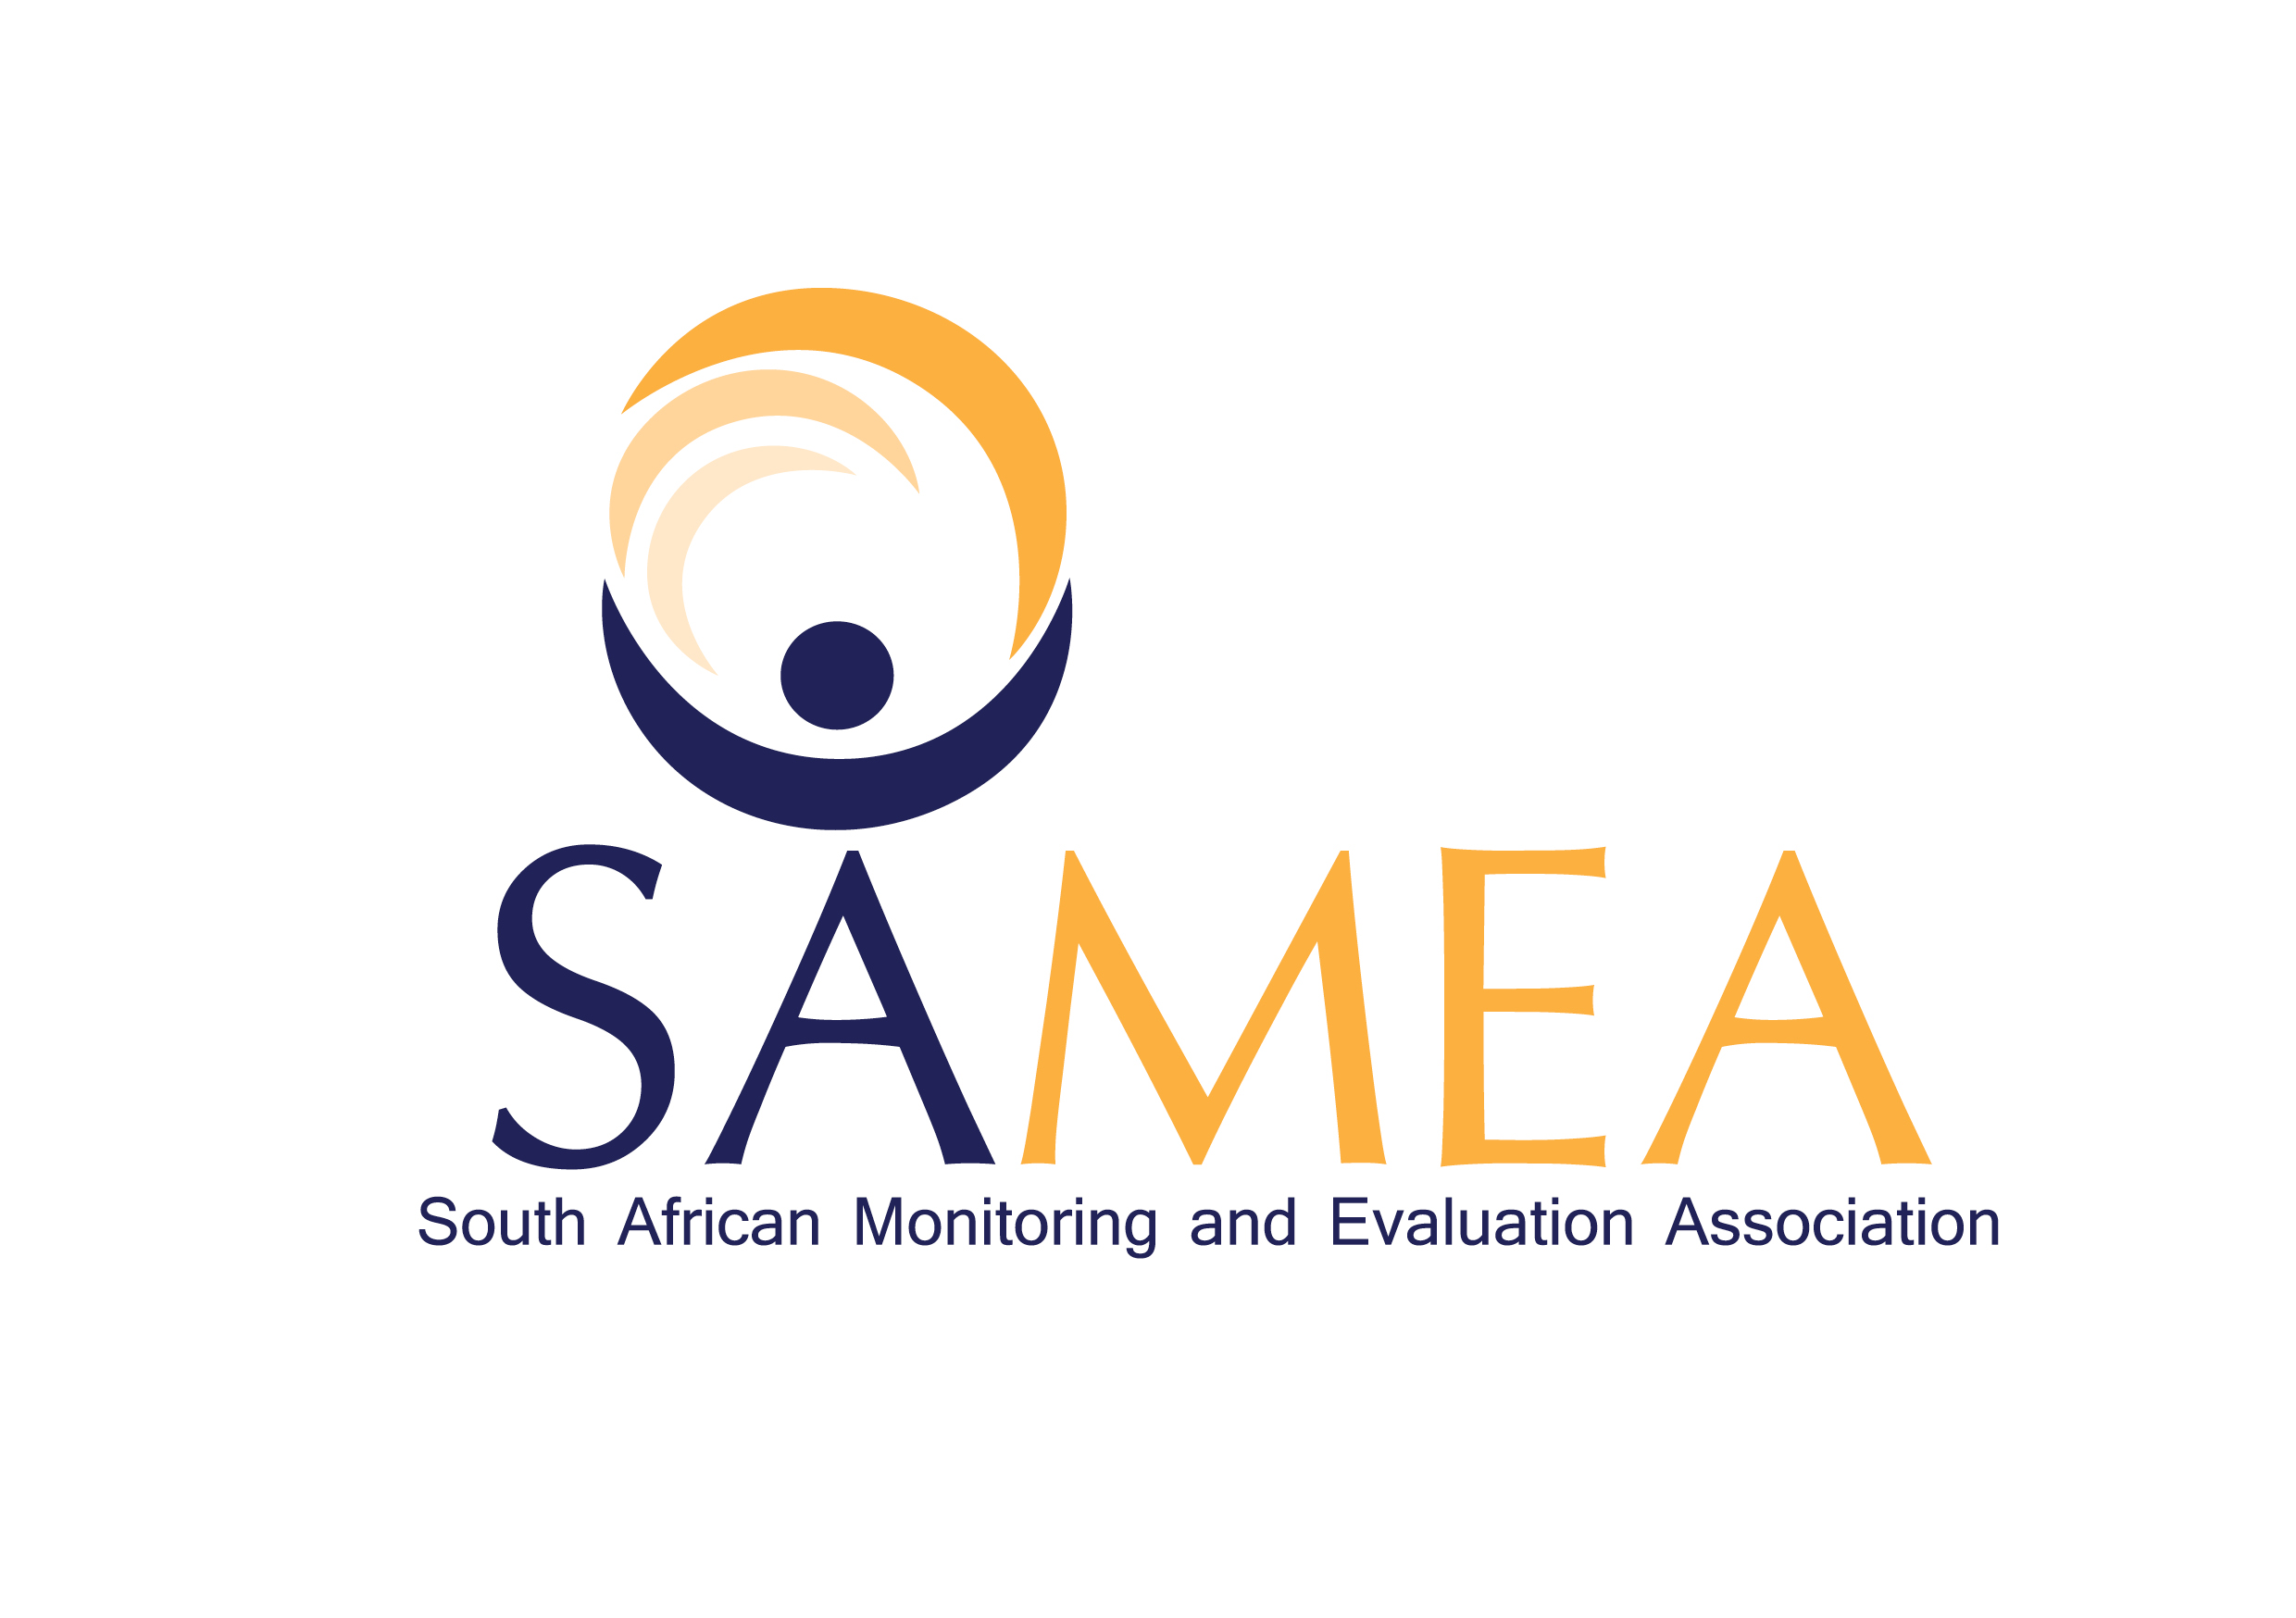 South African Monitoring and Evaluation Association (SAMEA)